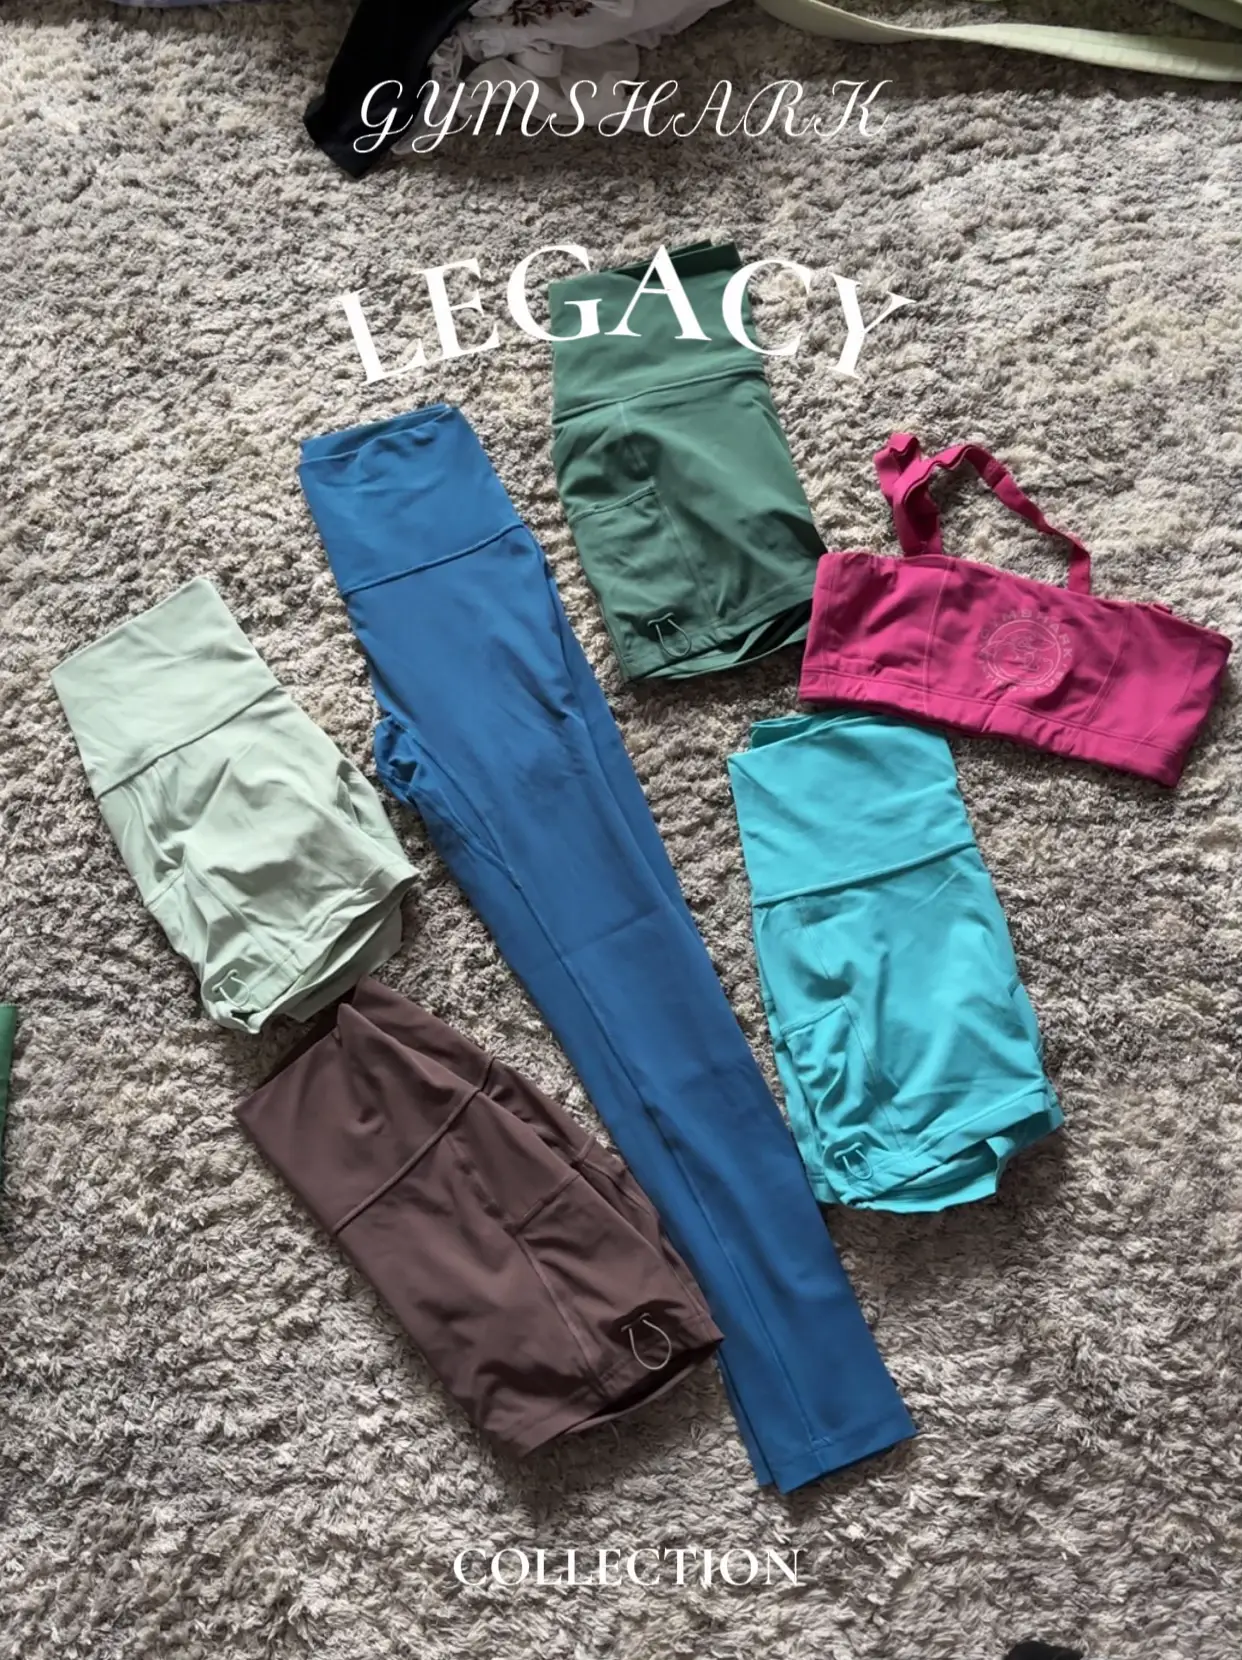 GYMSHARK LEGACY COLLECTION HAUL AND REVIEW 